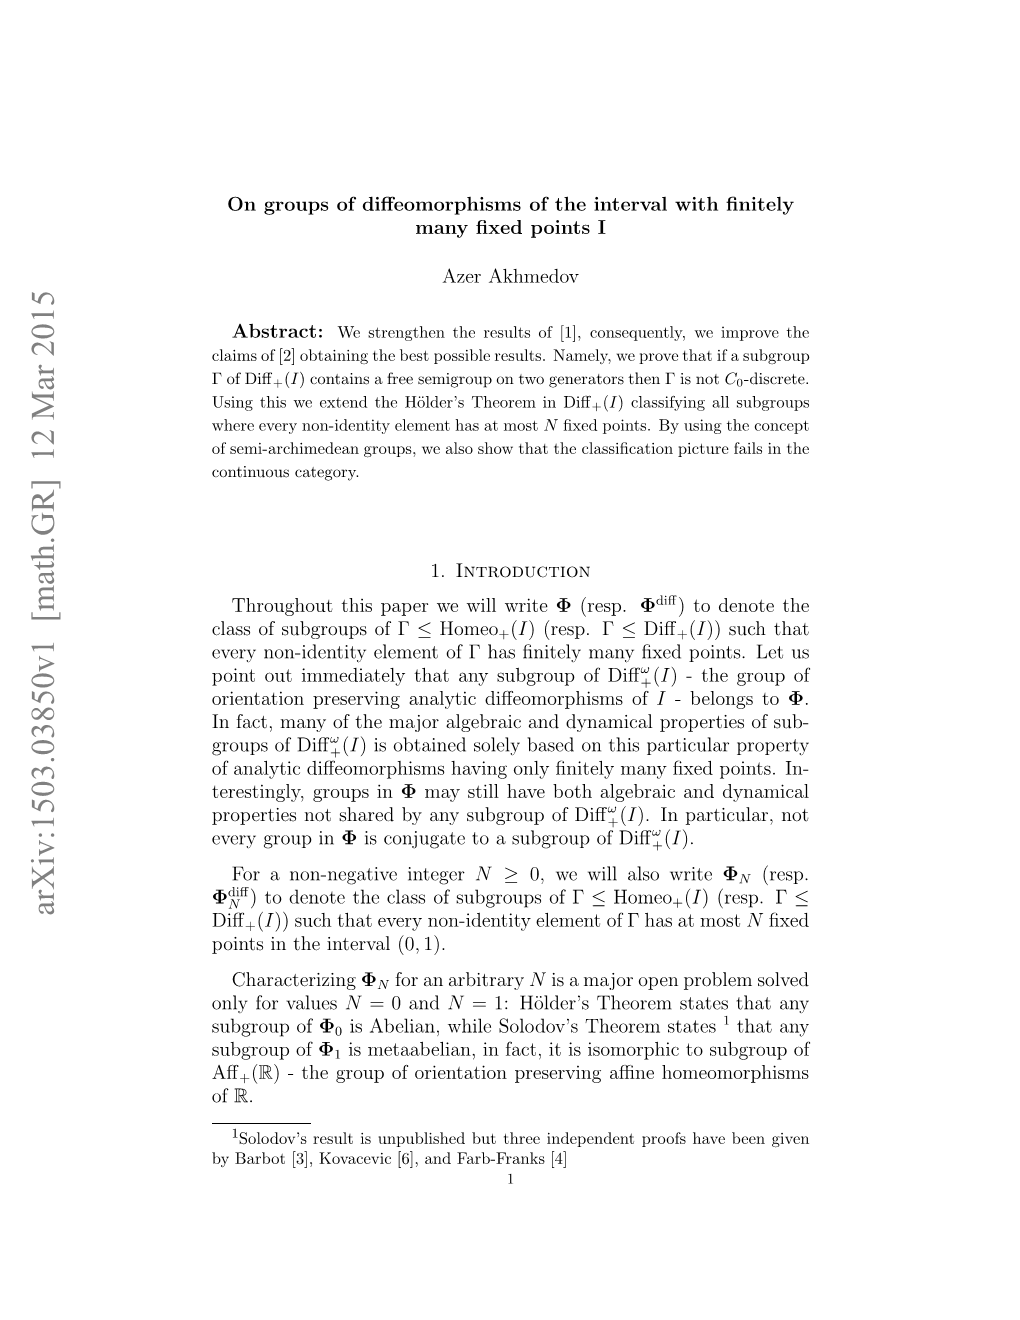 On Groups of Diffeomorphisms of the Interval with Finitely Many Fixed Points I